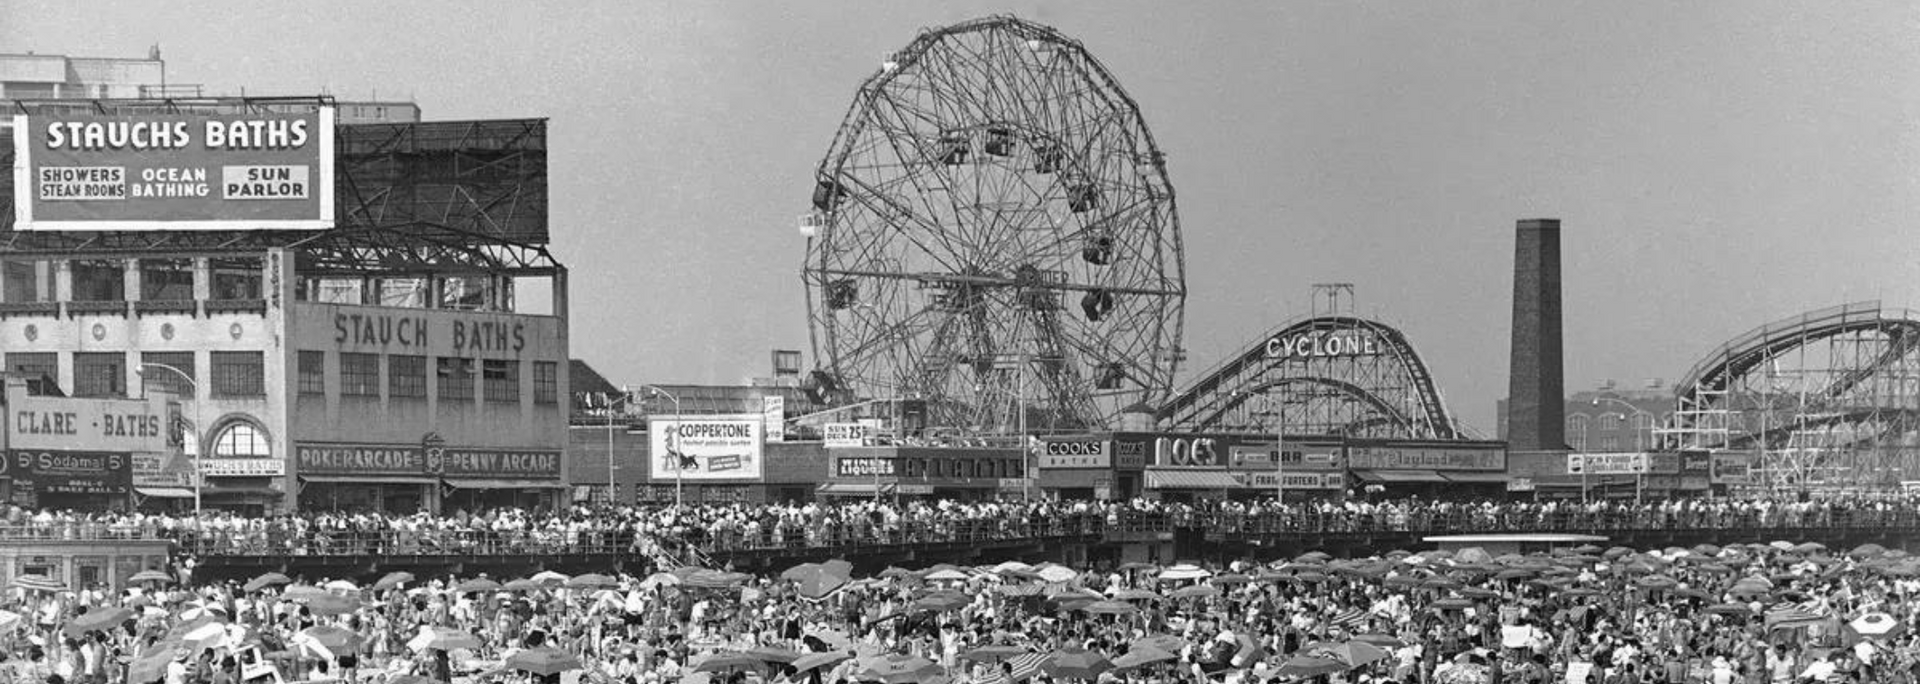 Historic picture of one of the Coney Island theme parks.
